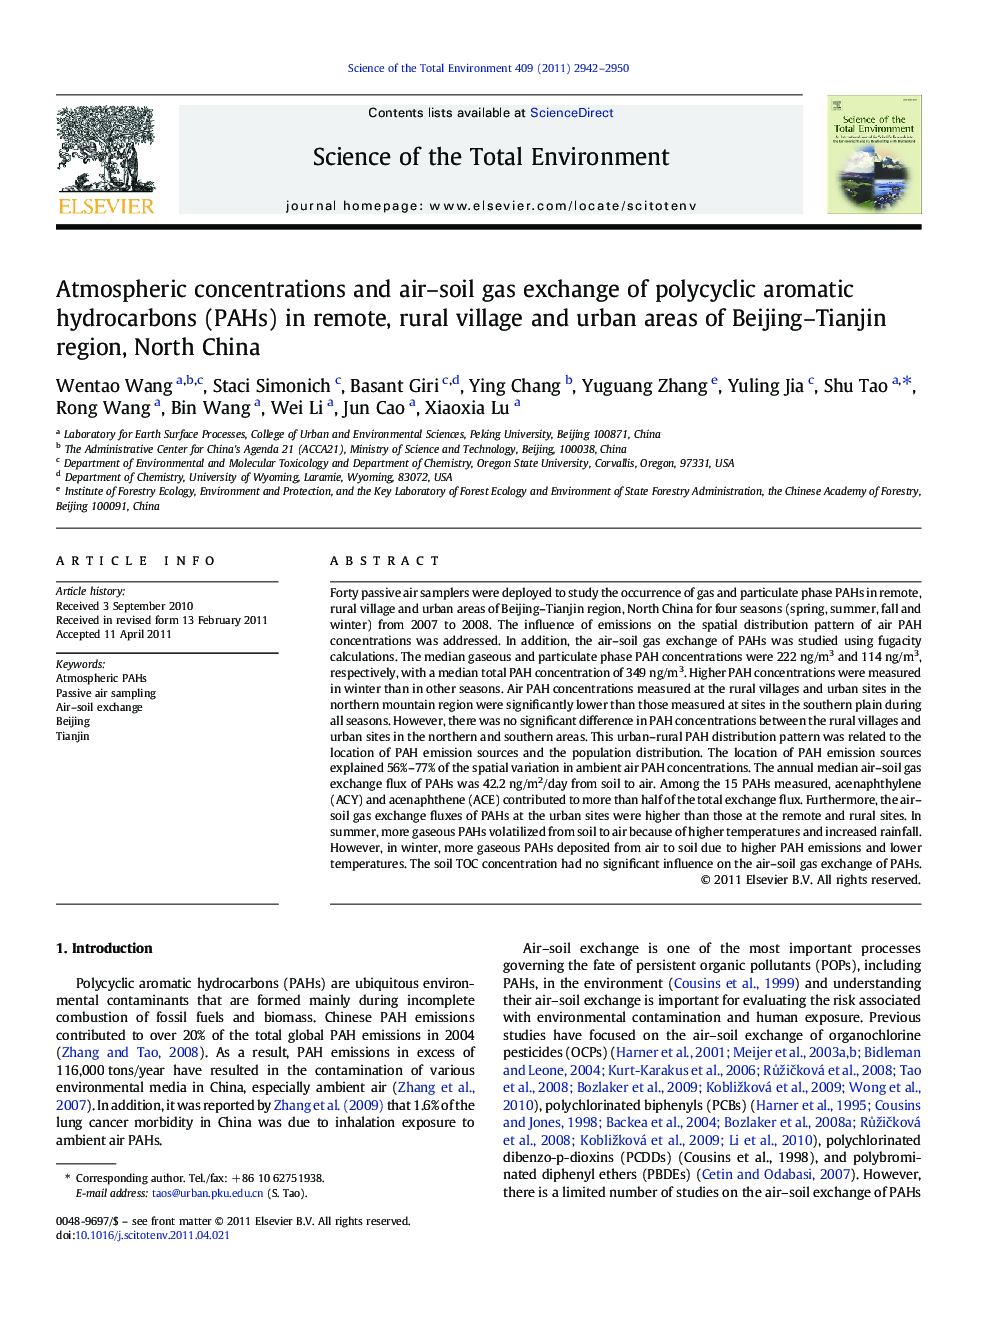 Atmospheric concentrations and air–soil gas exchange of polycyclic aromatic hydrocarbons (PAHs) in remote, rural village and urban areas of Beijing–Tianjin region, North China